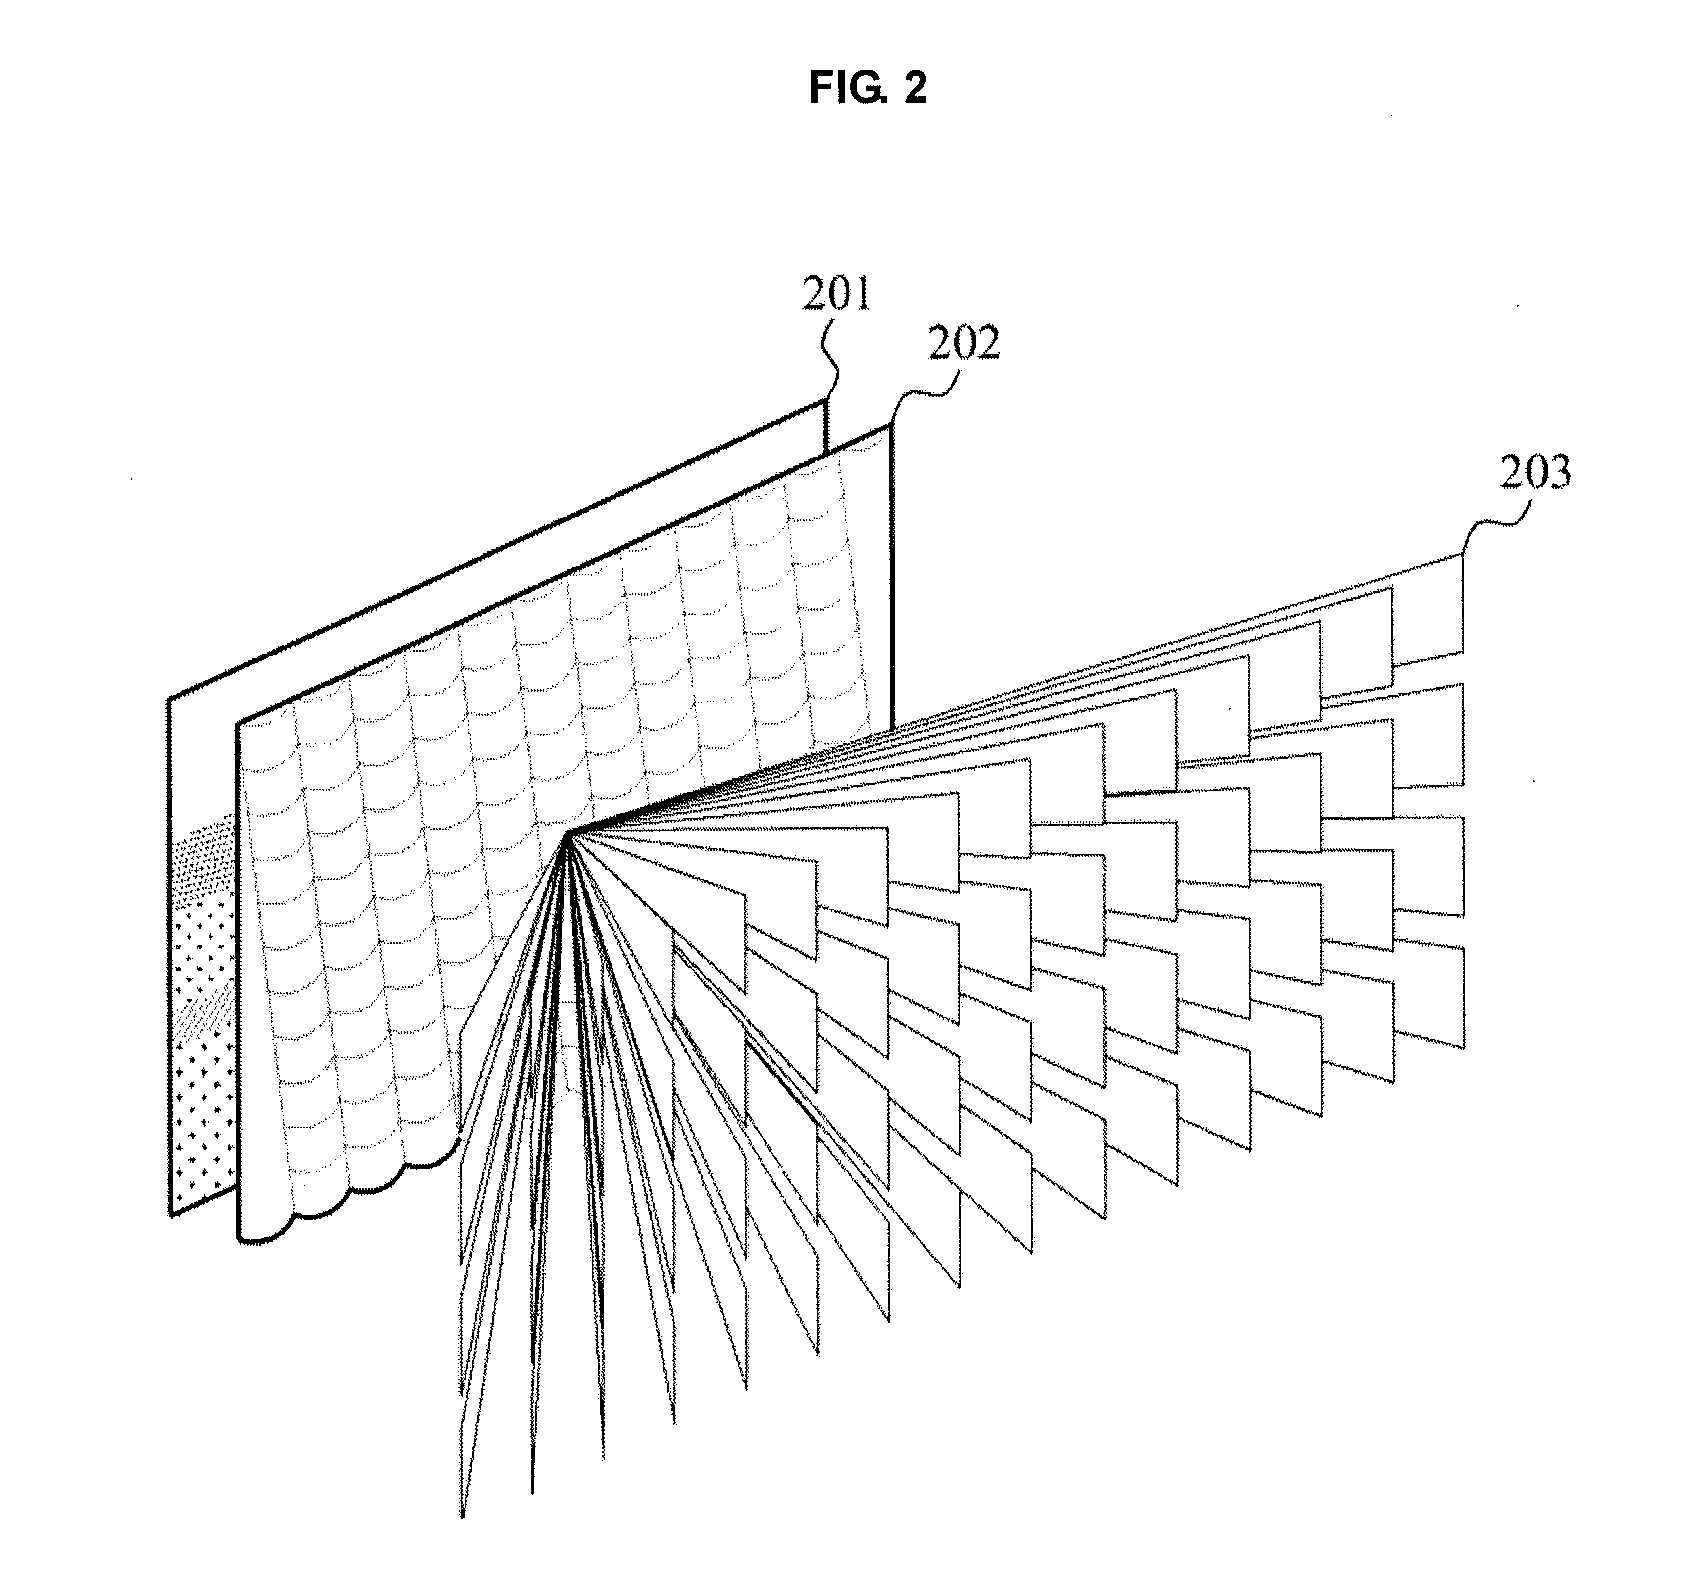 Apparatus and method for adaptively rendering subpixel